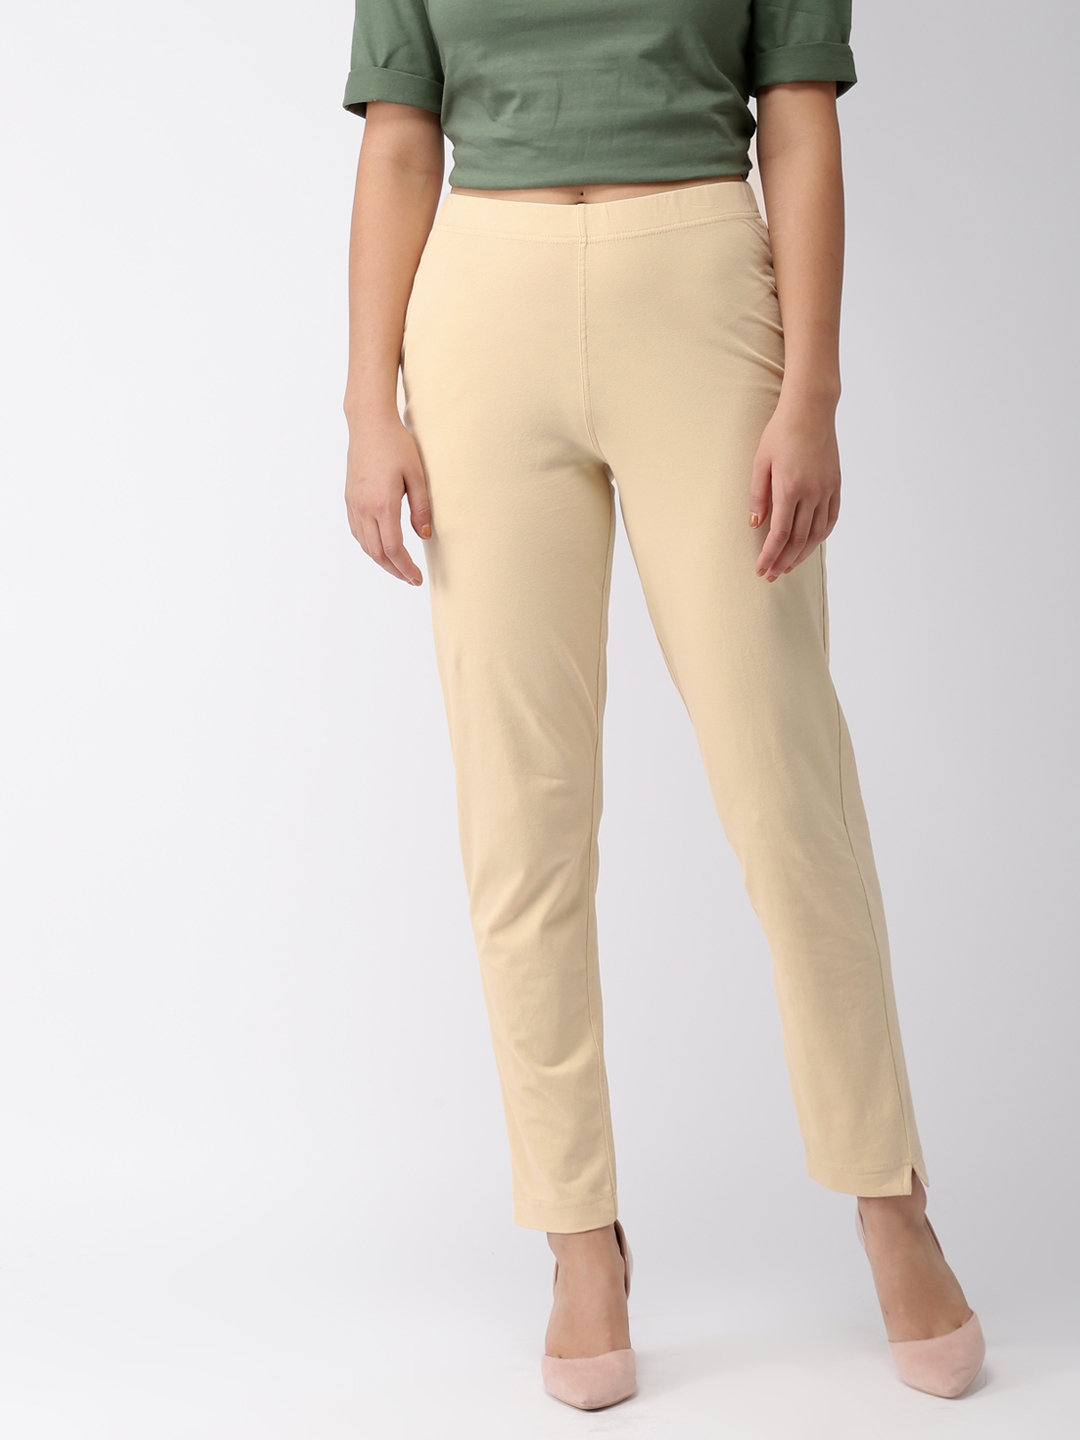 Ardor Edition Cream Tapered Fit Chinos Trousers  Lincot